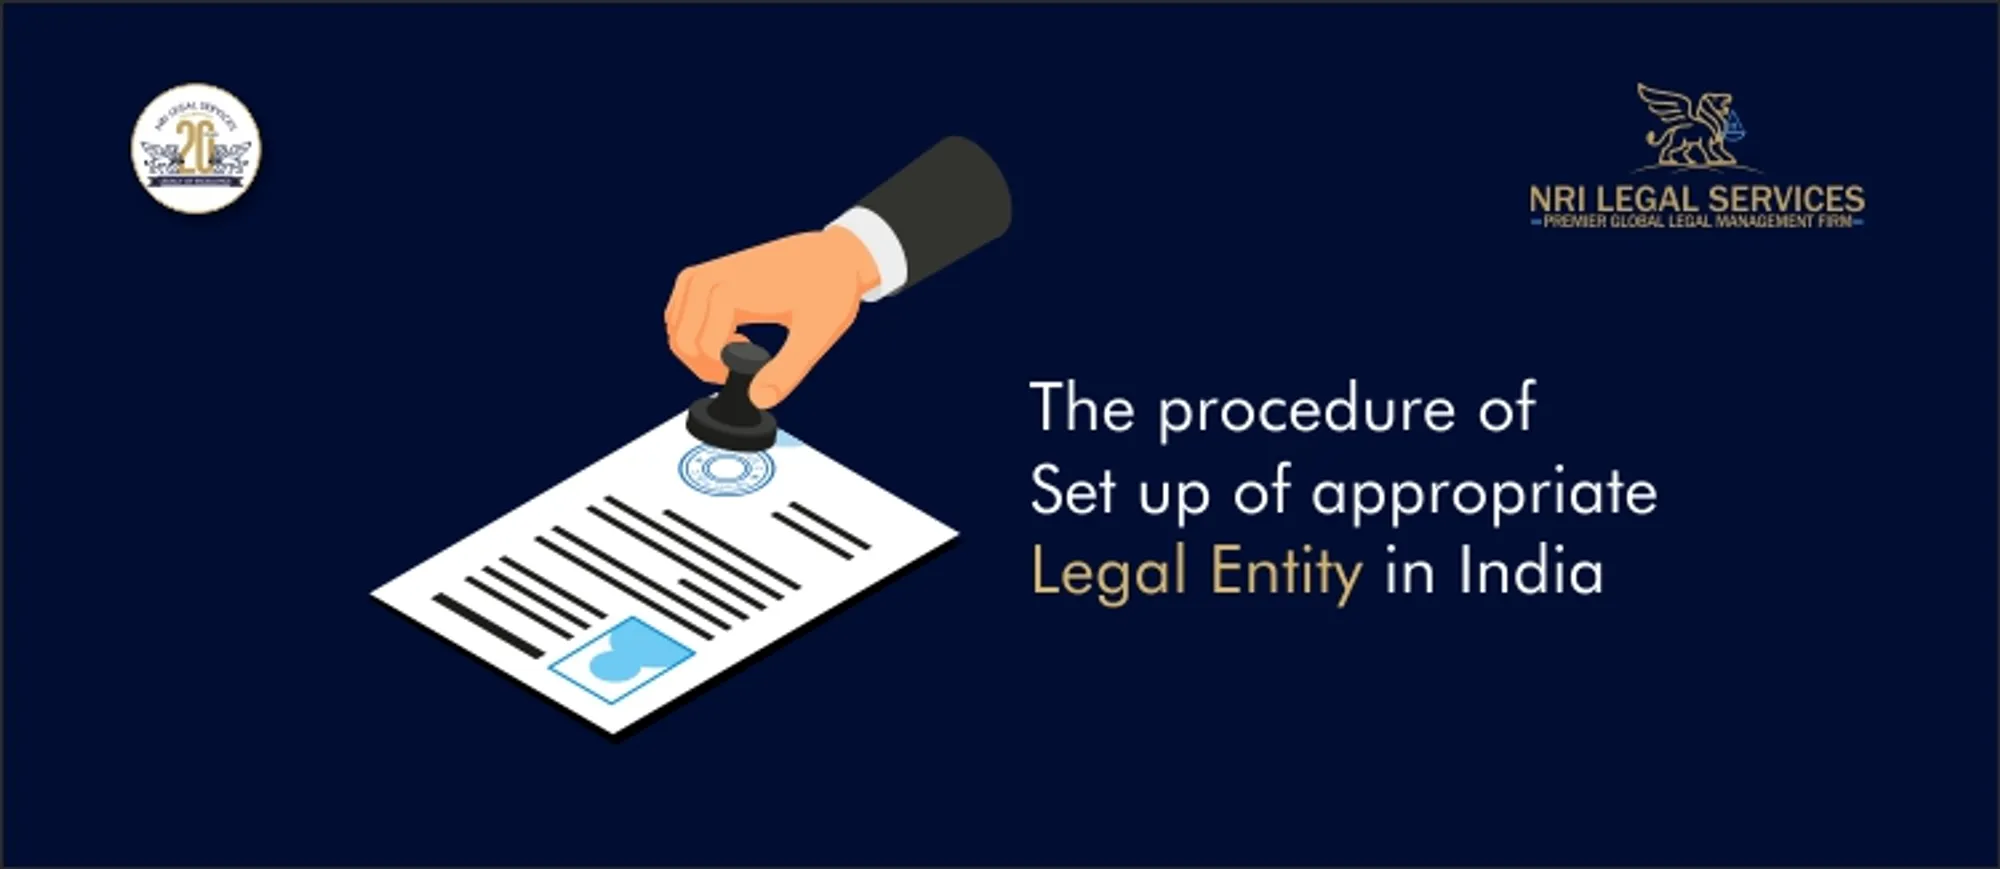 The procedure of Set up of appropriate legal entity in India